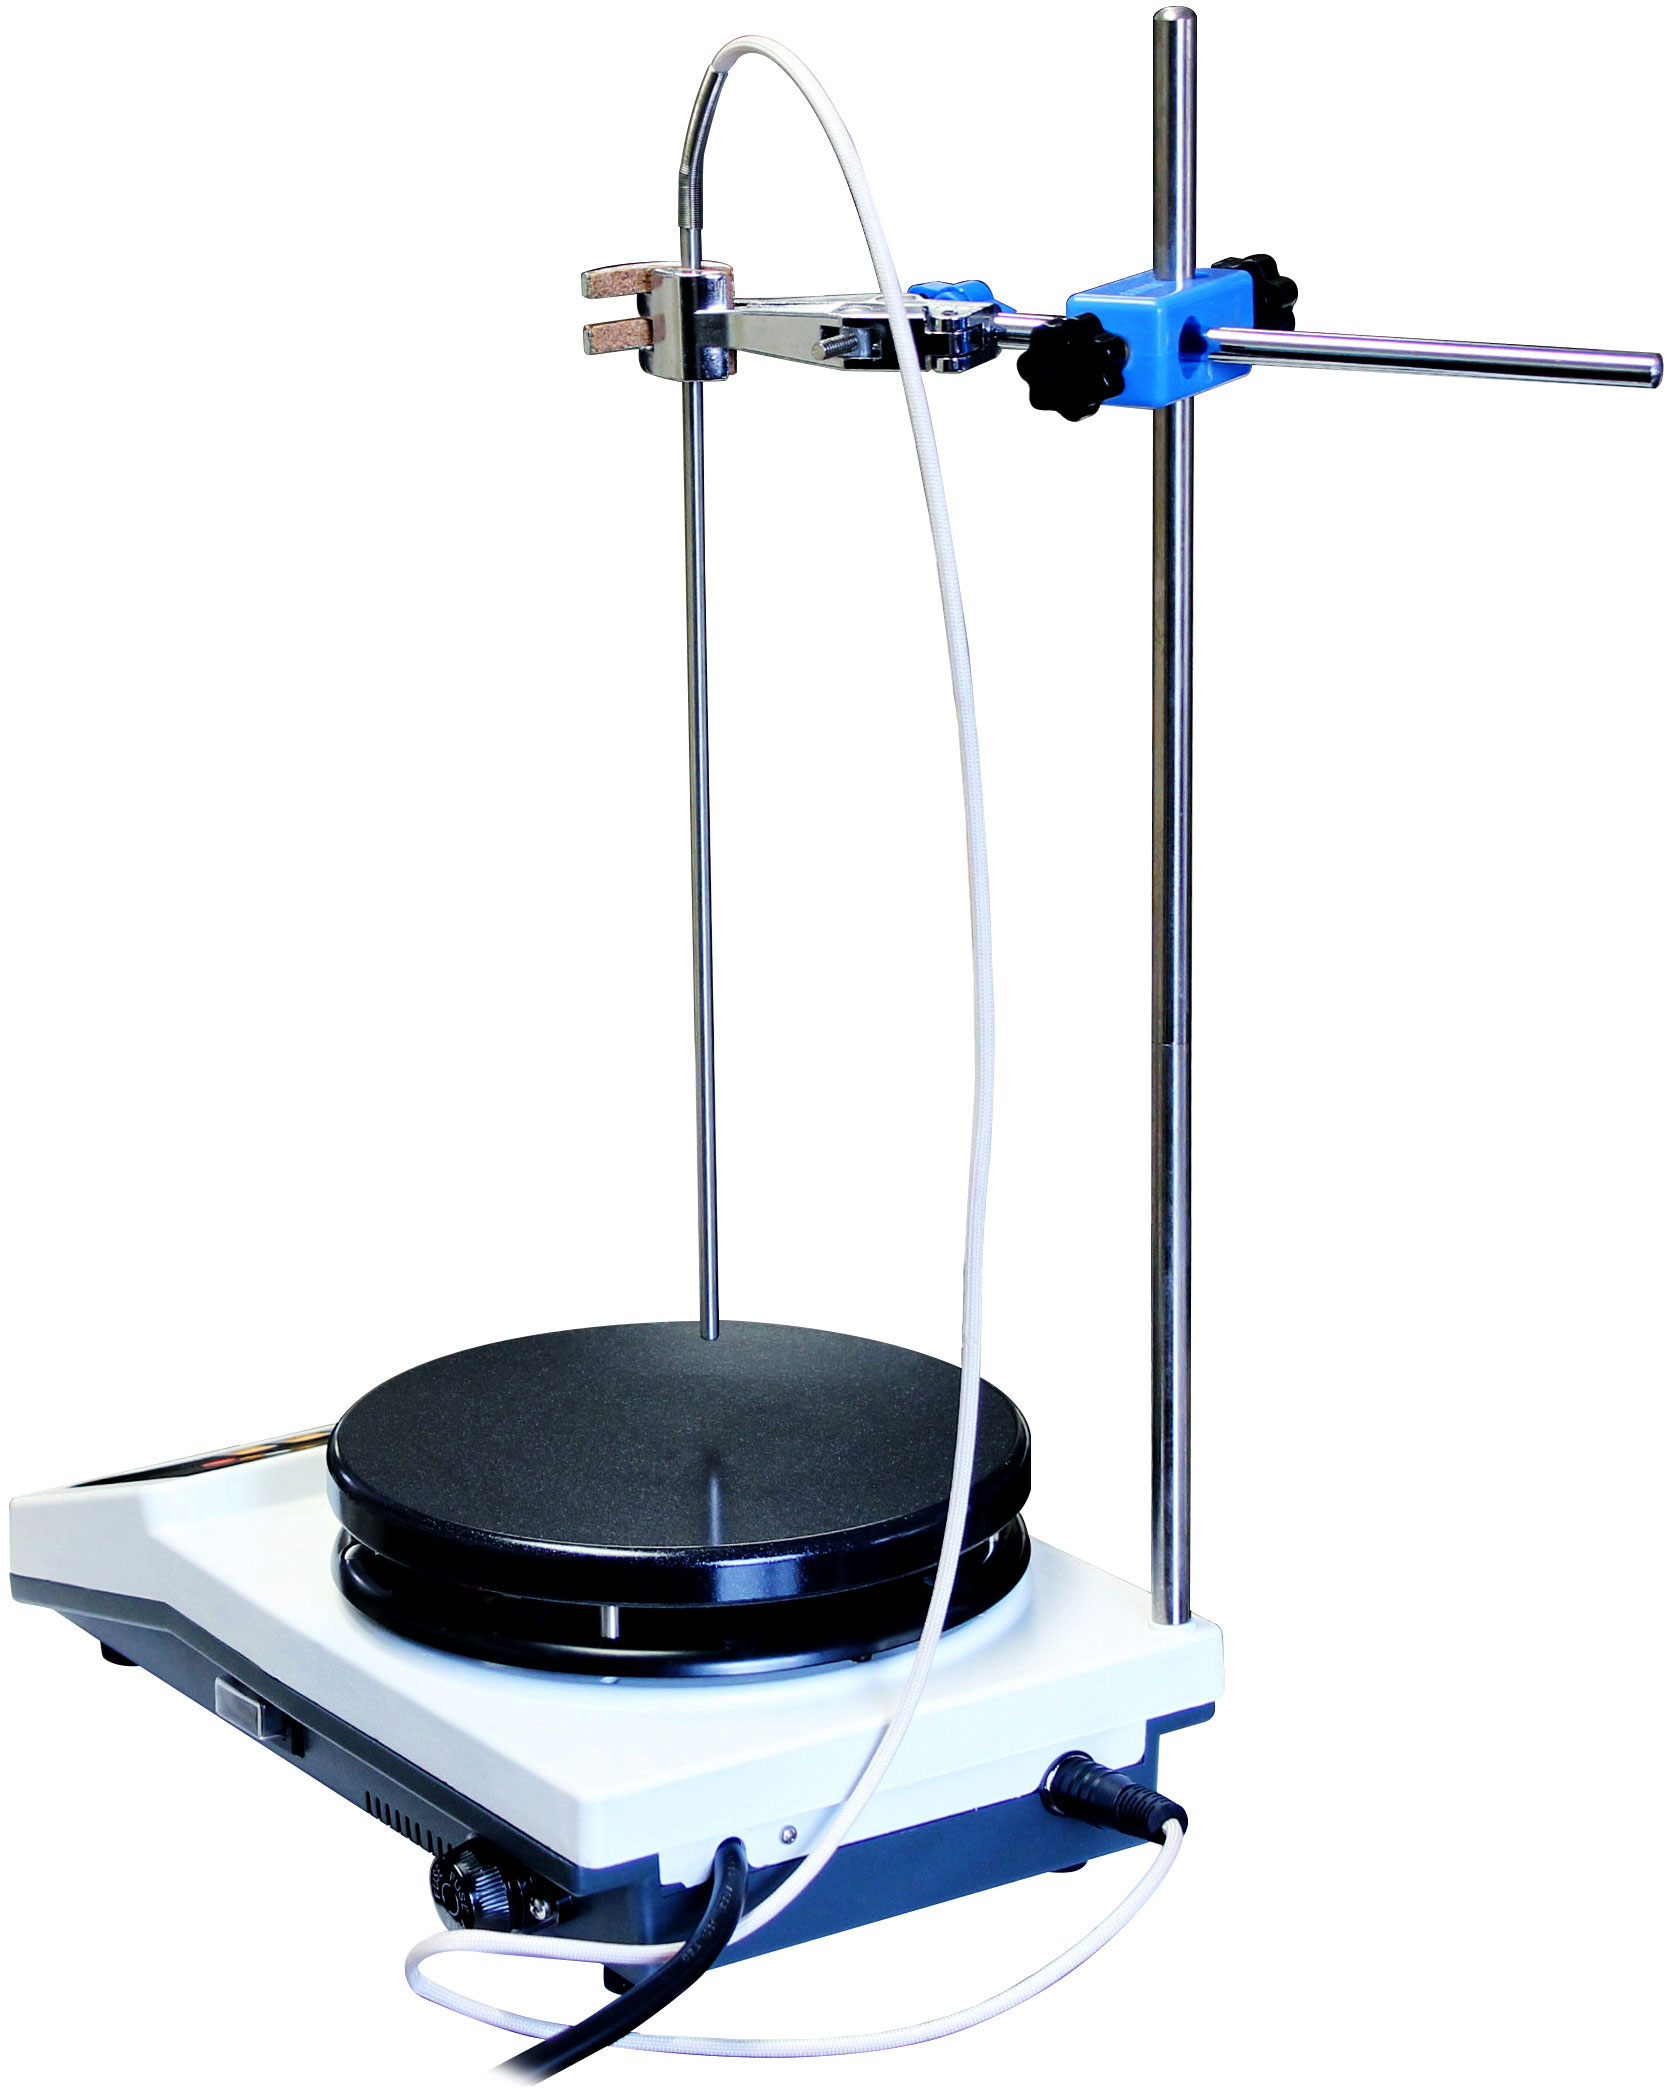 350C 2000RPM 1-Gallon PID Magnetic Stirrer with 7" Heated Plate